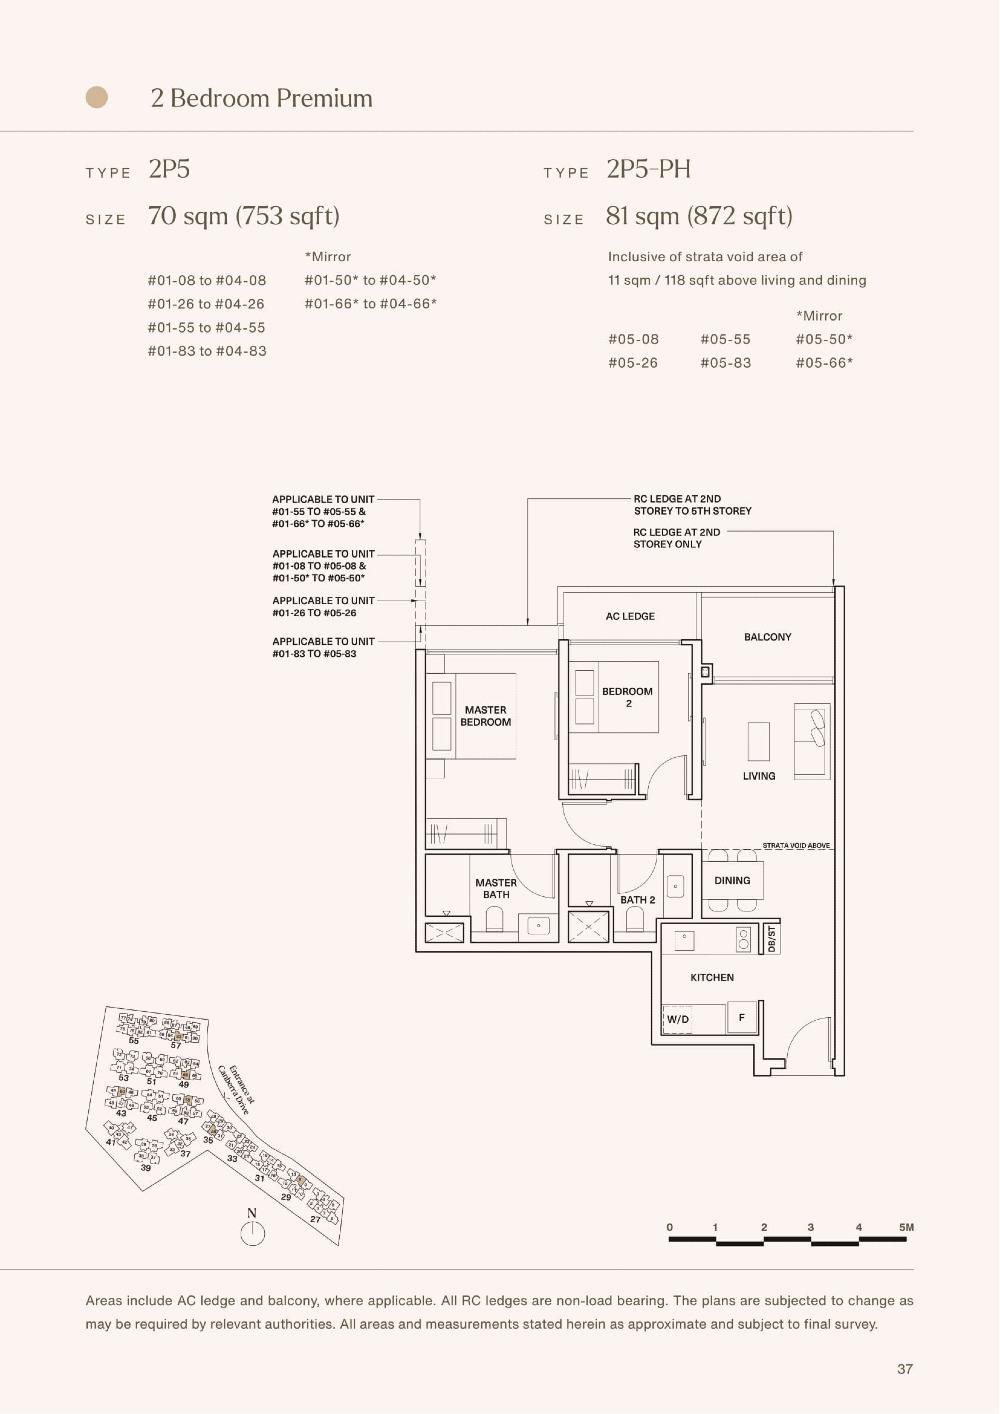 fp-the-watergardens-at-canberra-2p5-floor-plan.jpg